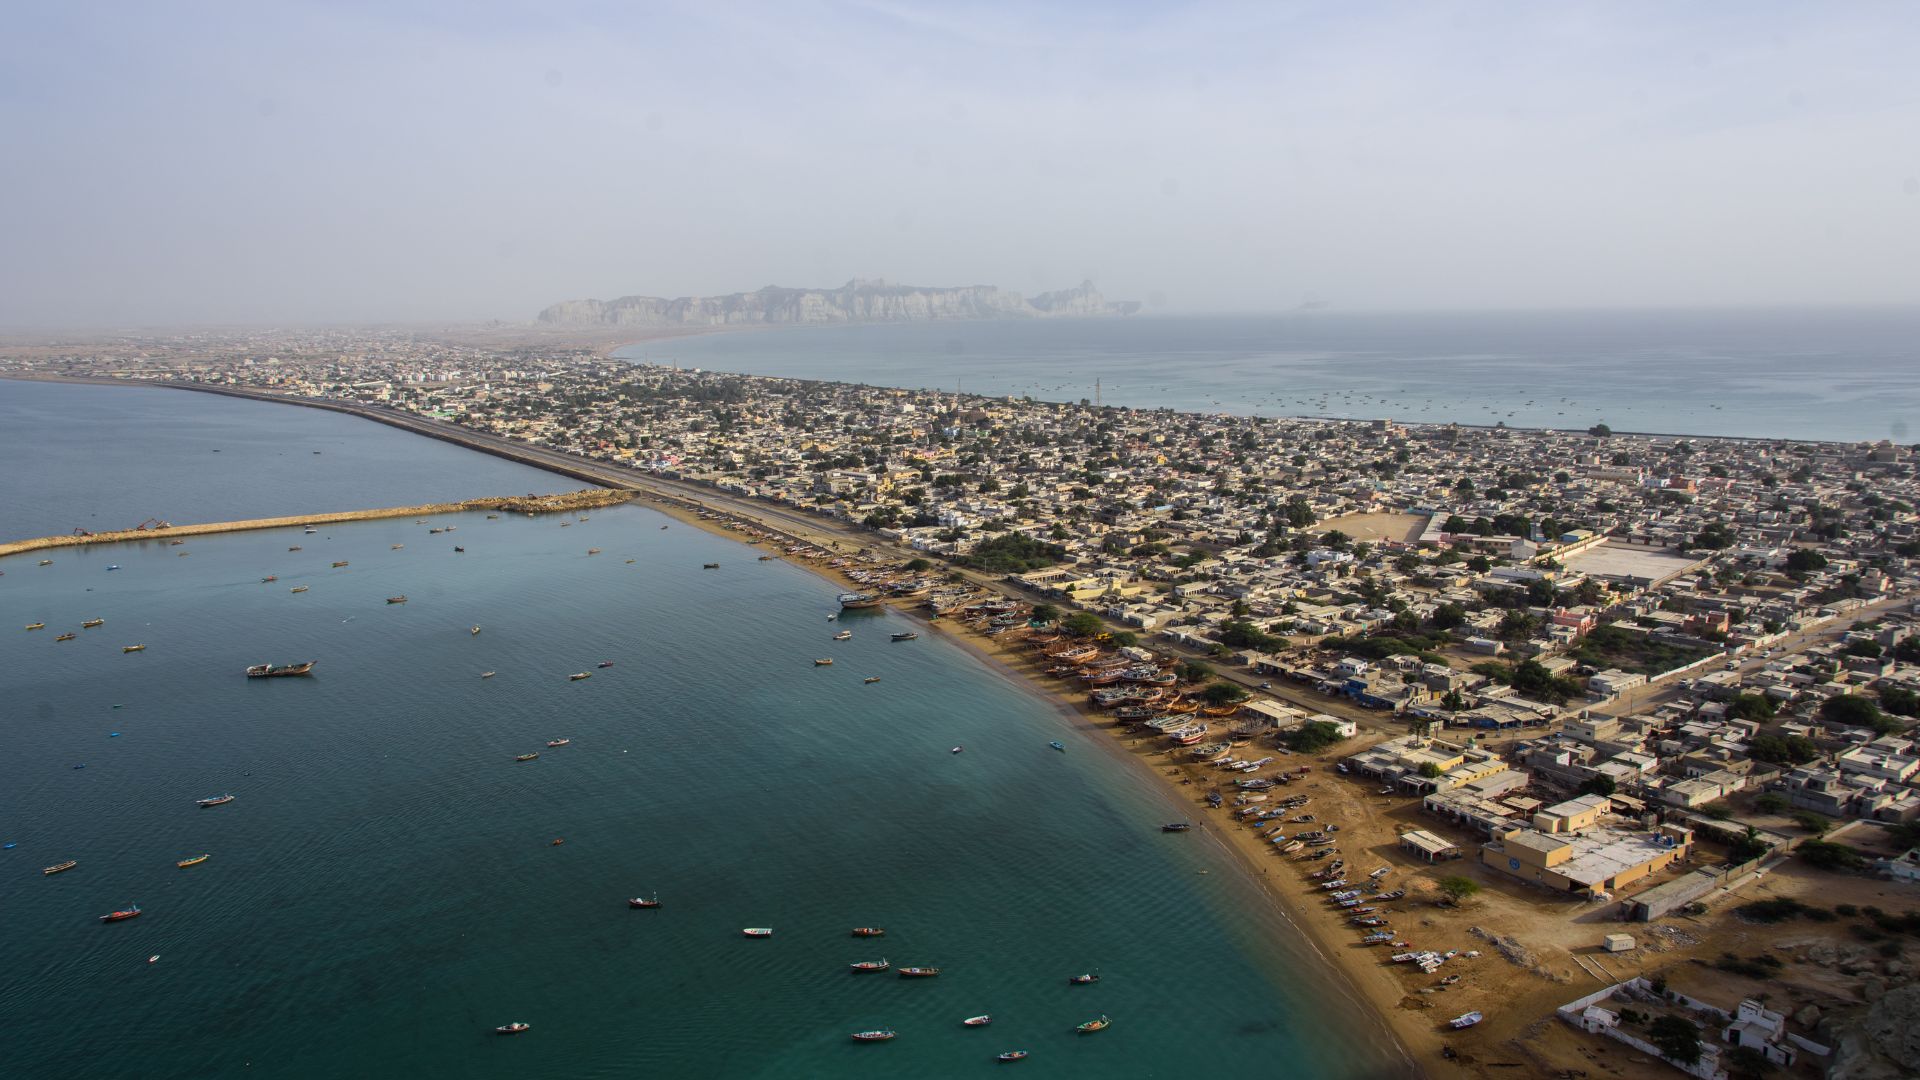 Gwadar, Once Offered to India, Now a Vital Pakistani Port City